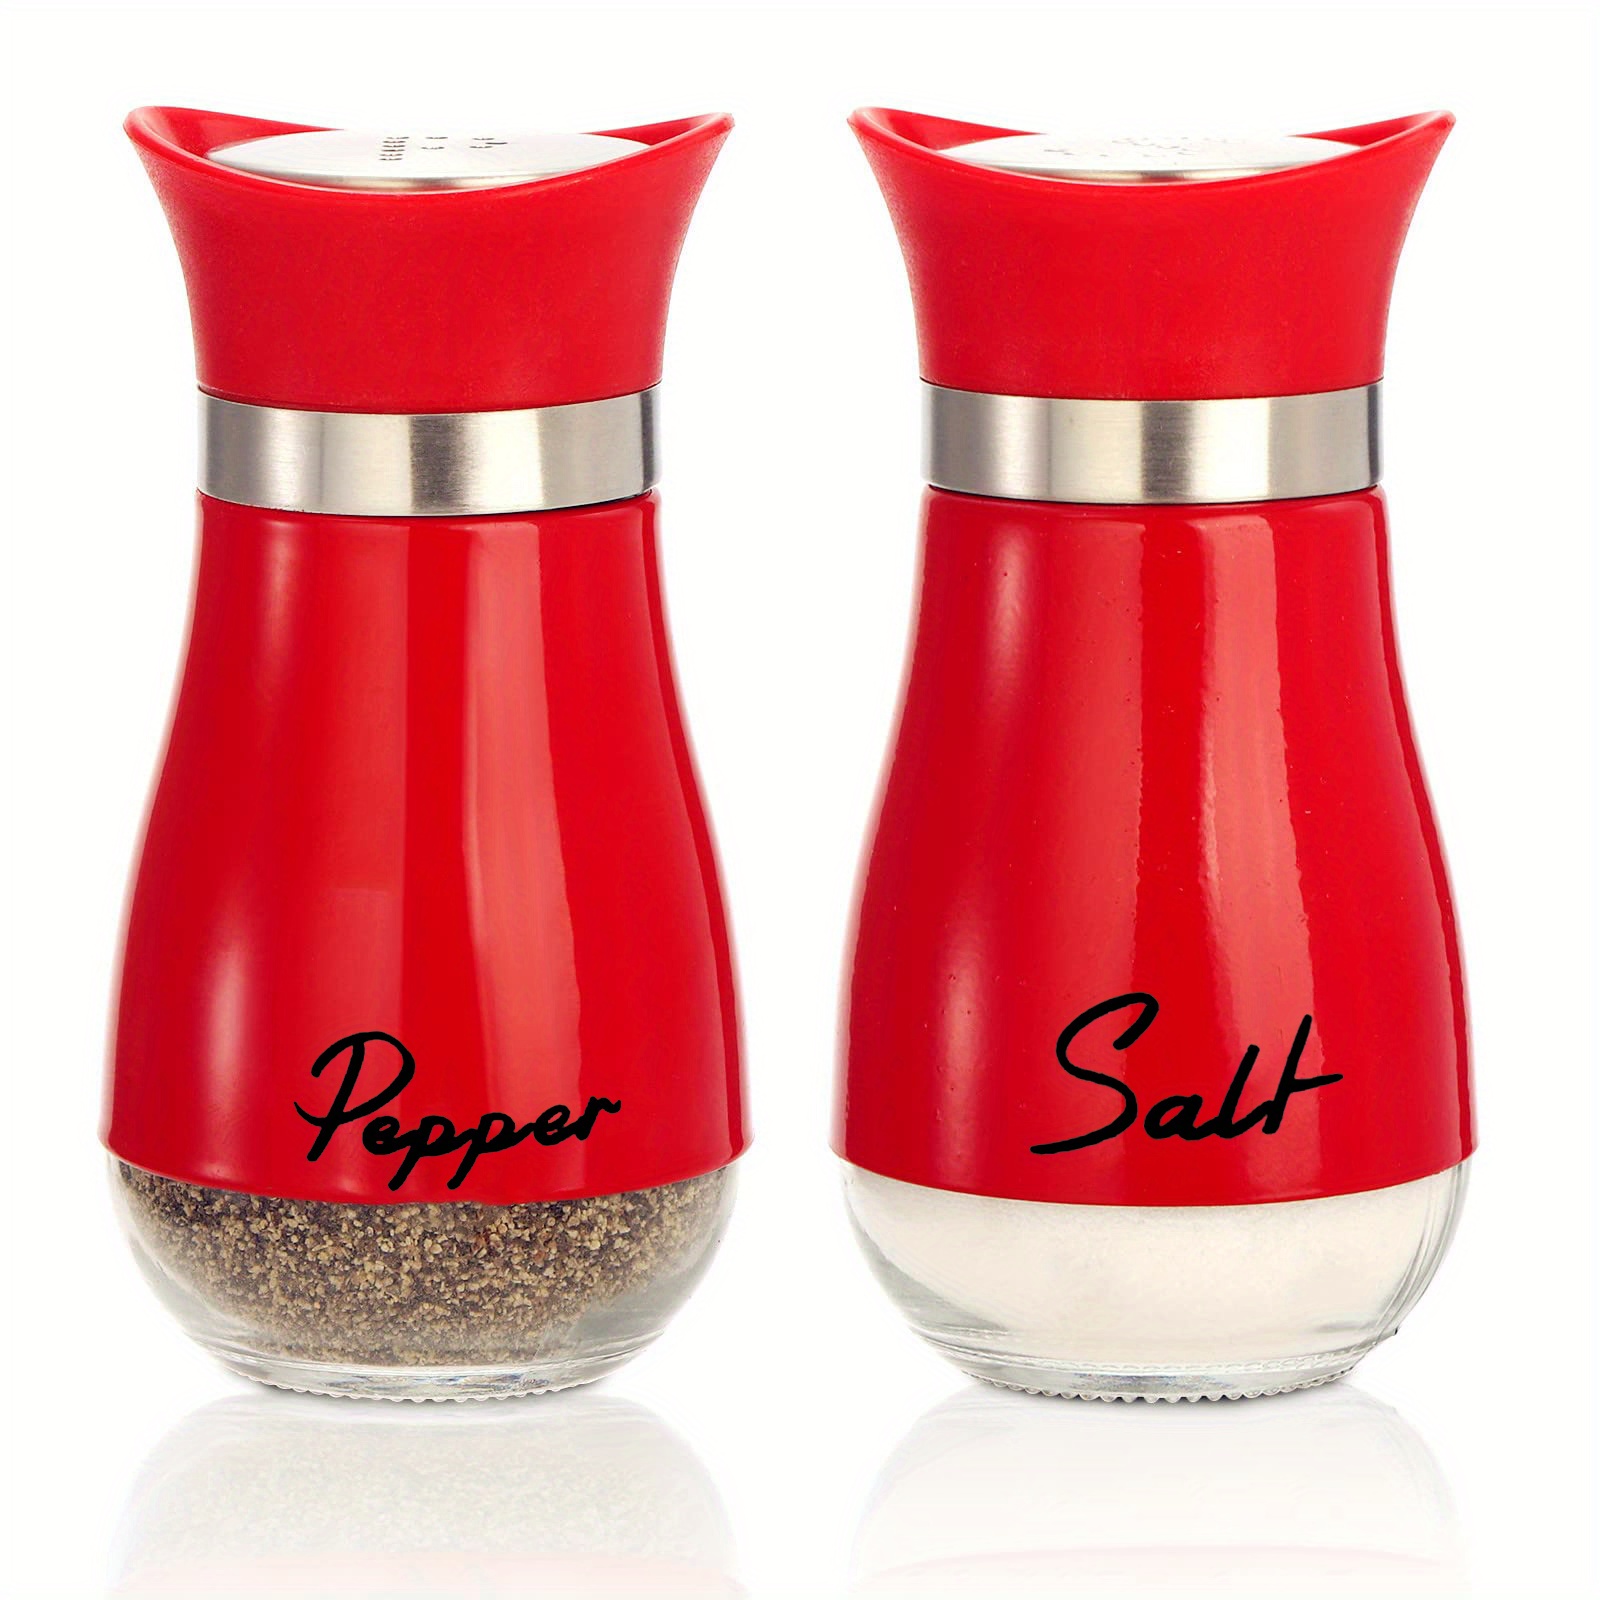 Salt and Pepper Shakers - Spice Dispenser with Adjustable Pour